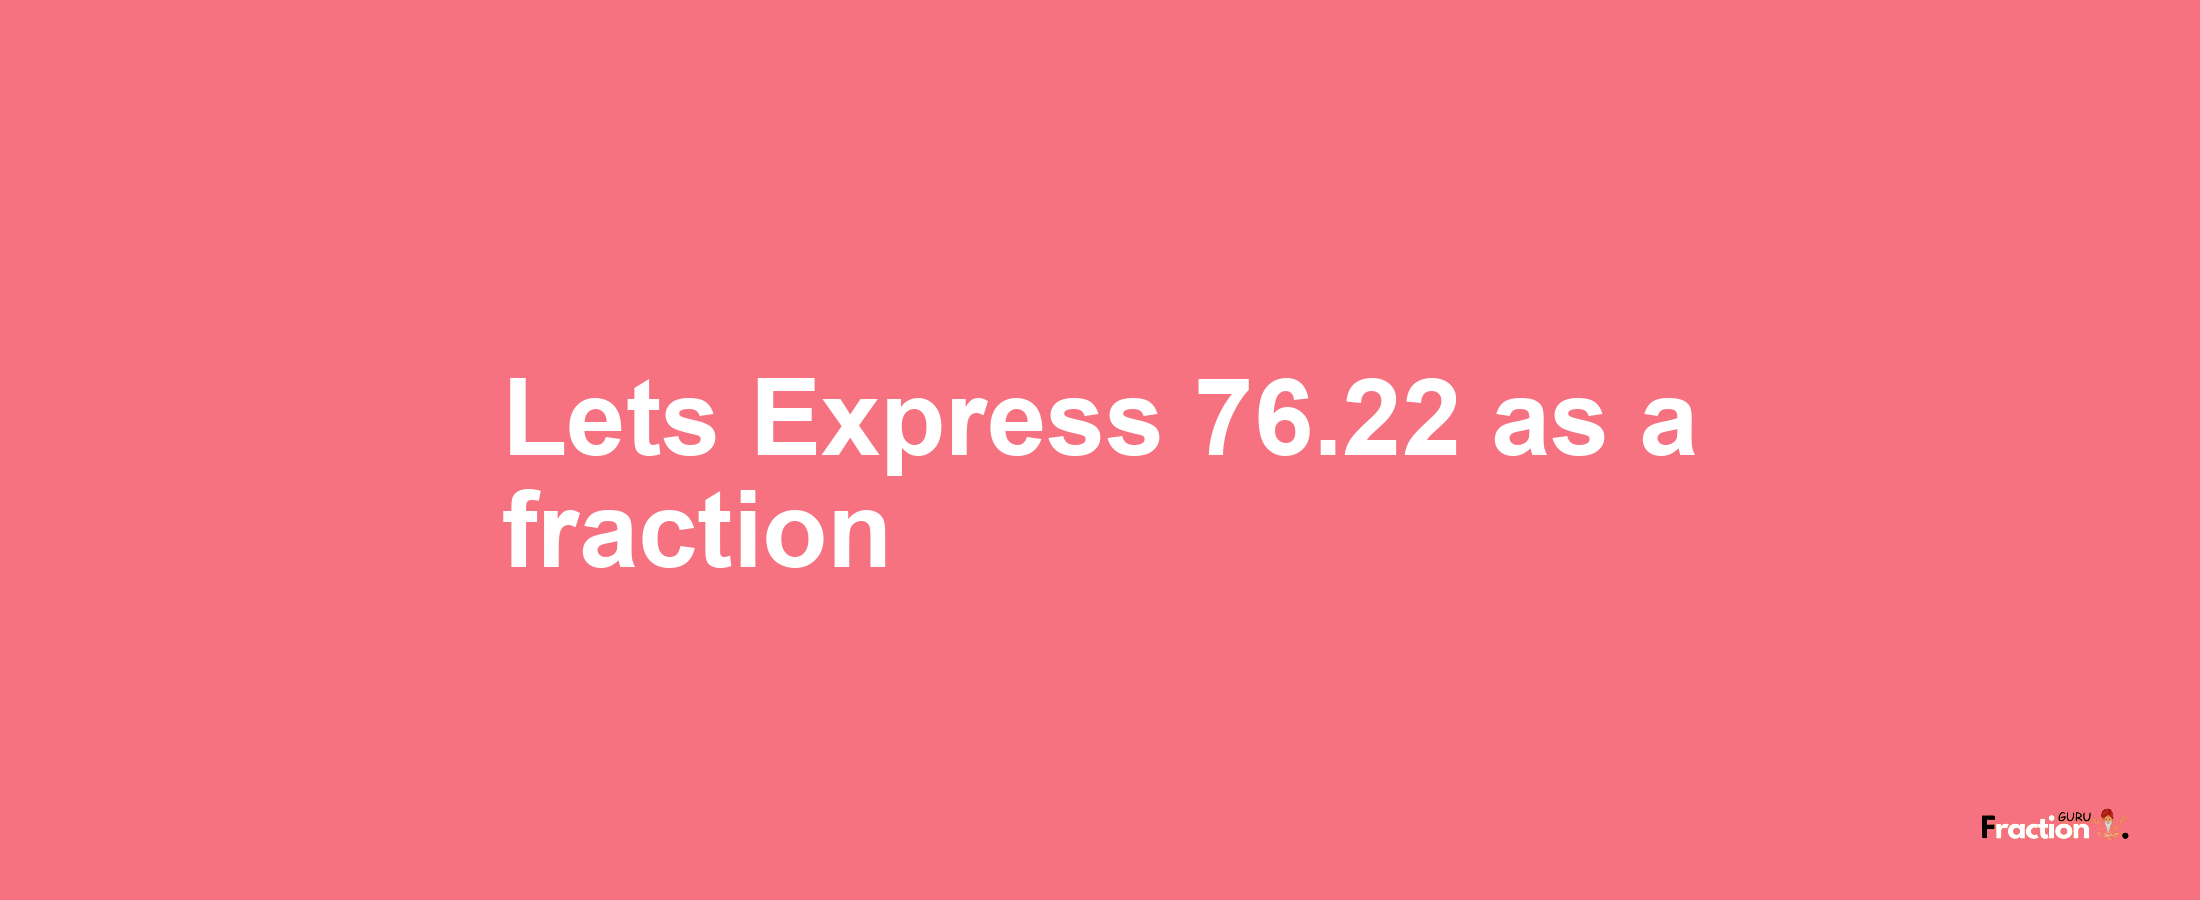 Lets Express 76.22 as afraction